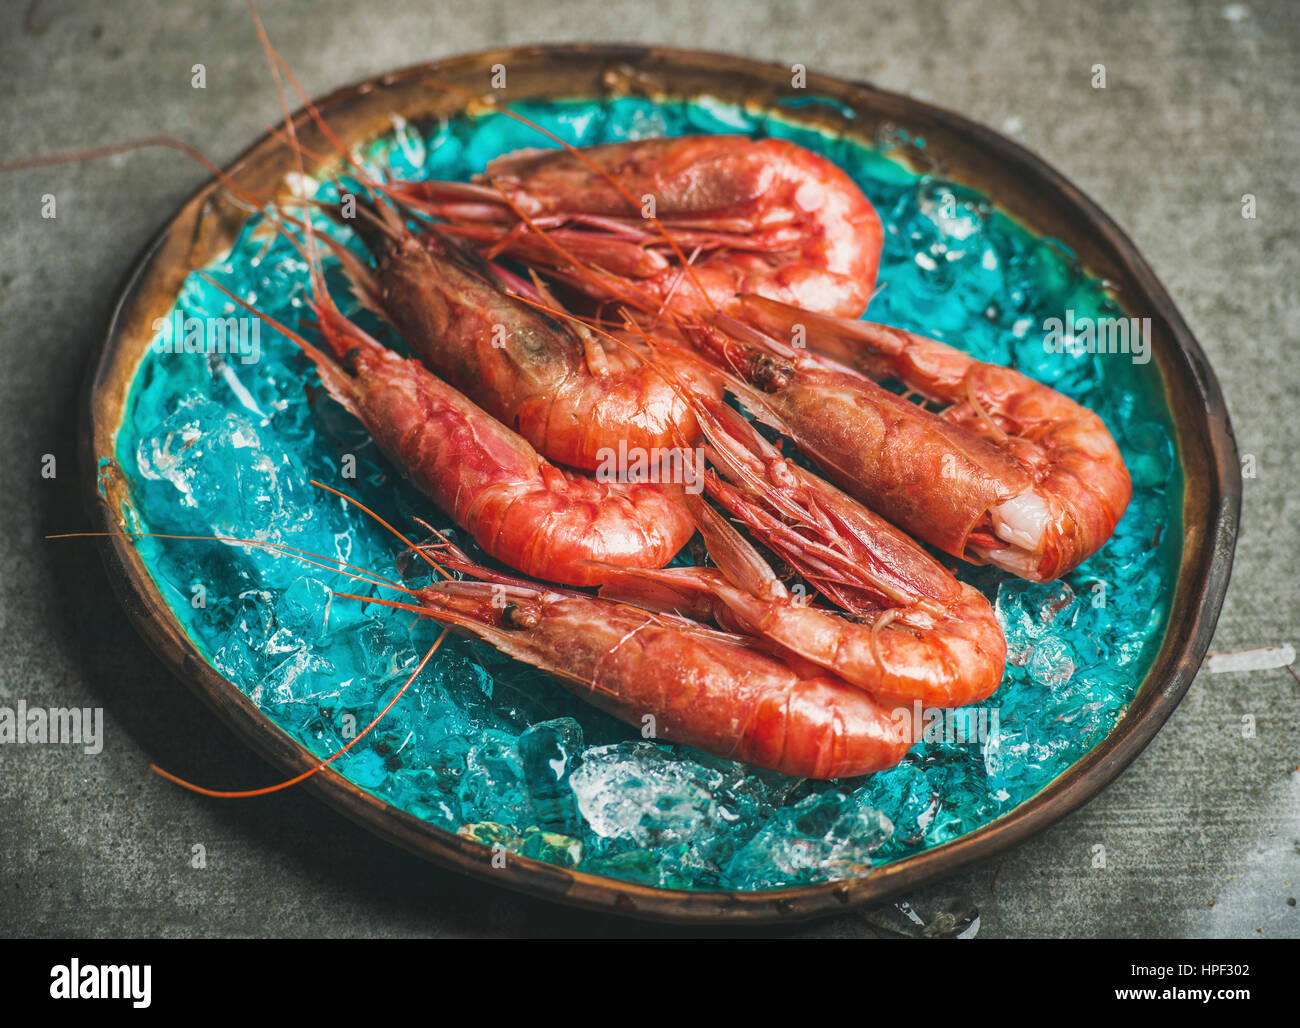 Raw uncooked red shrimps on chipped ice in turquoise blue ceramic tray over grey concrete background, selective focus, horizontal composition. Fresh s Stock Photo